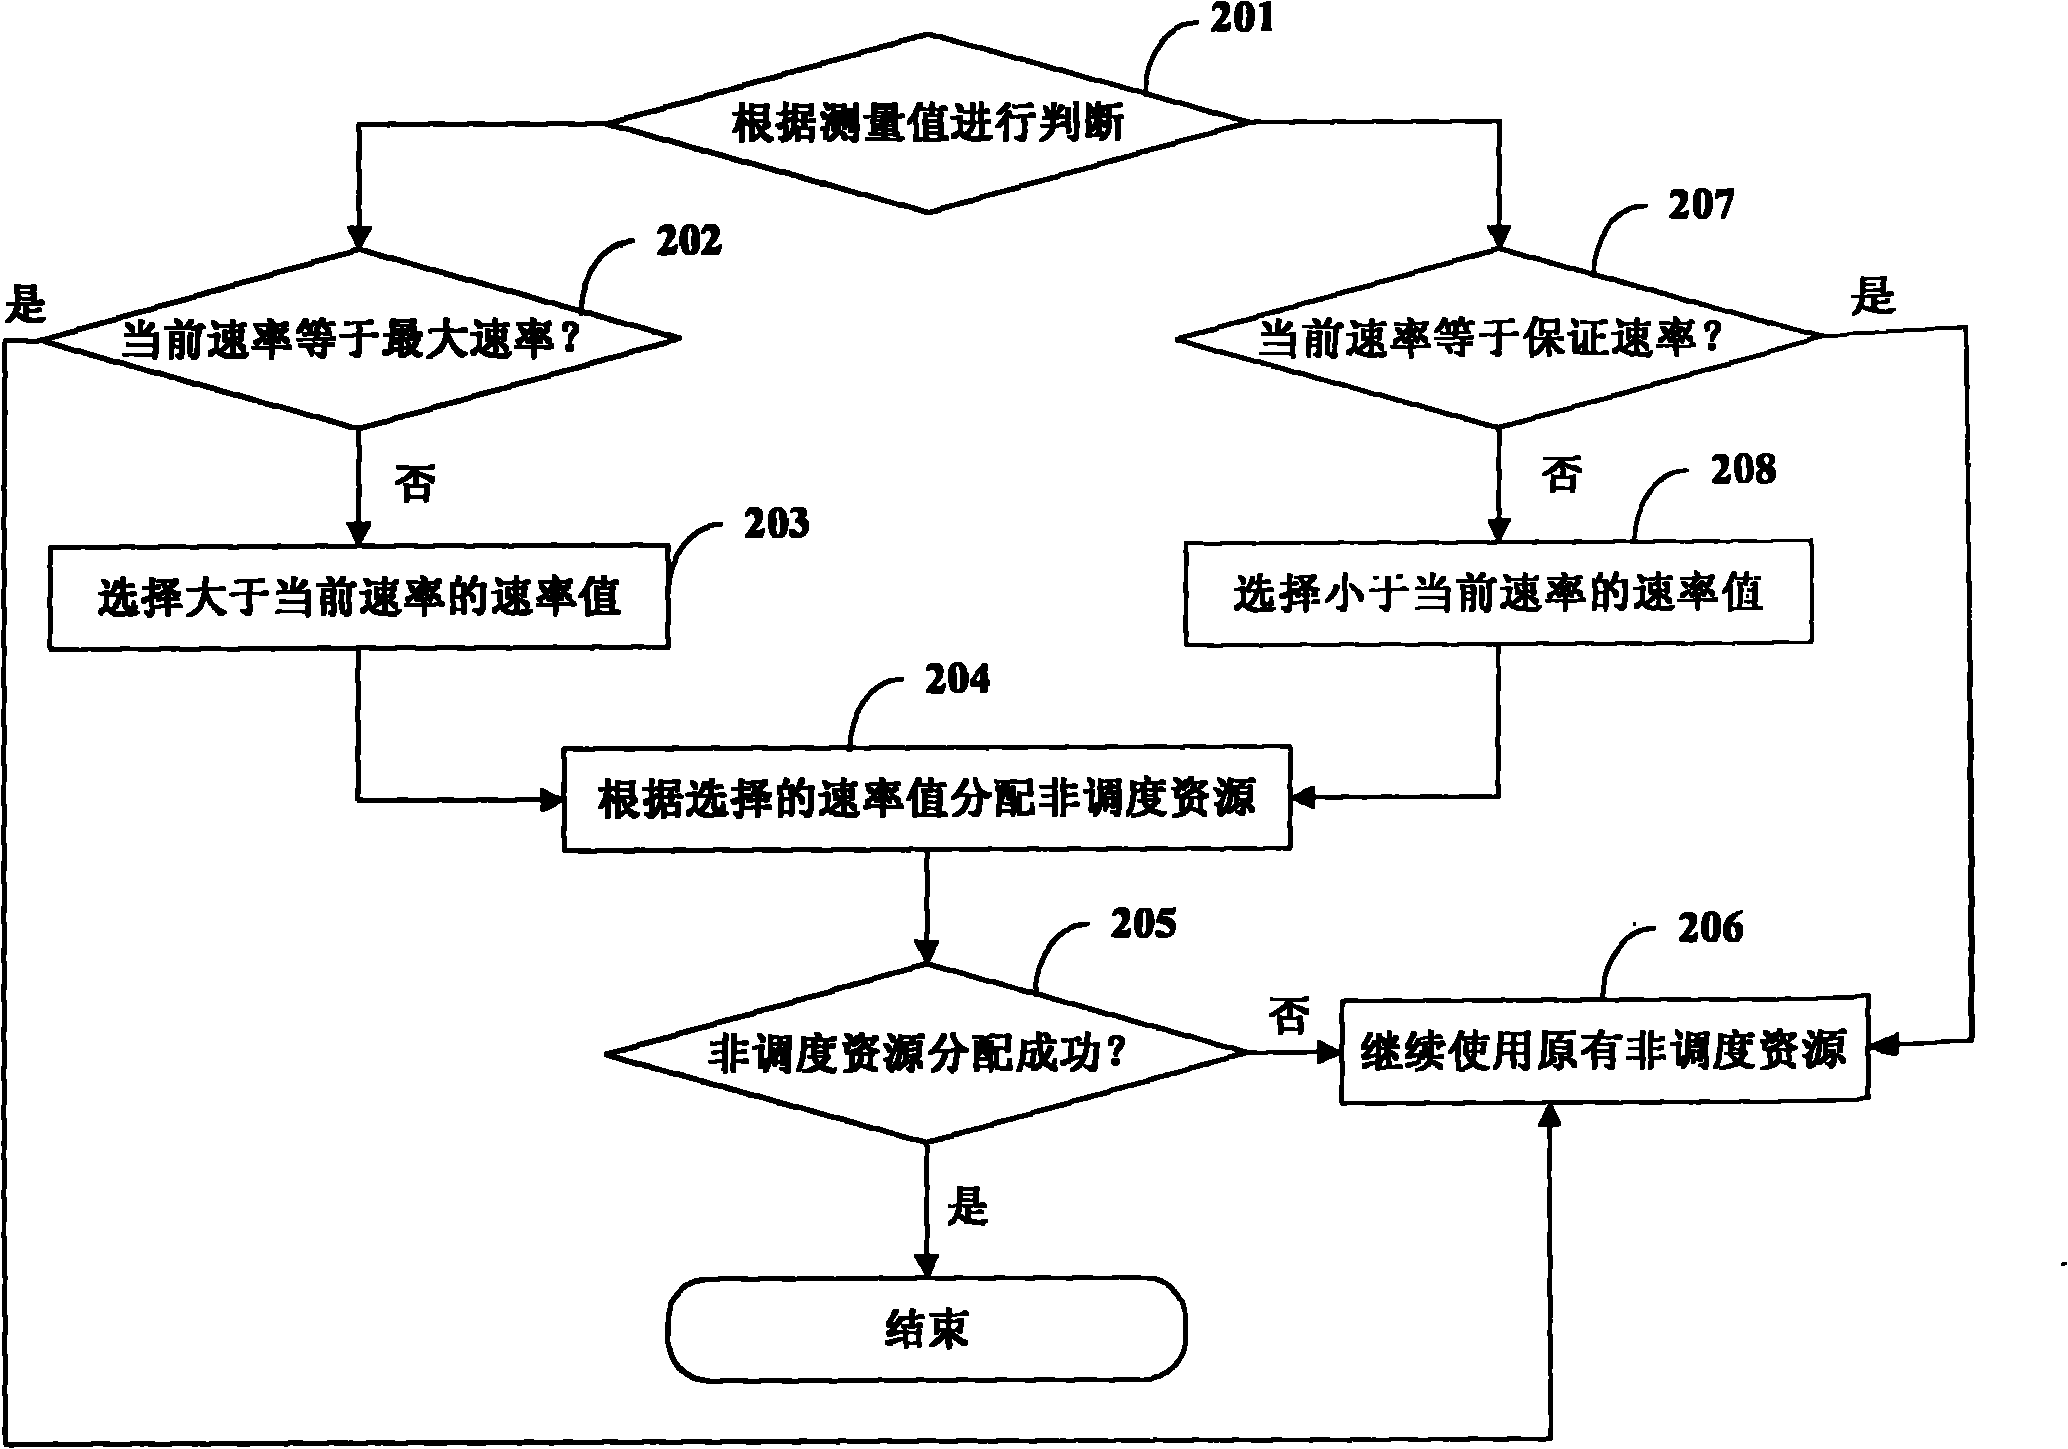 Method for controlling non-scheduled resource in high-speed uplink packet access (HSUPA) service